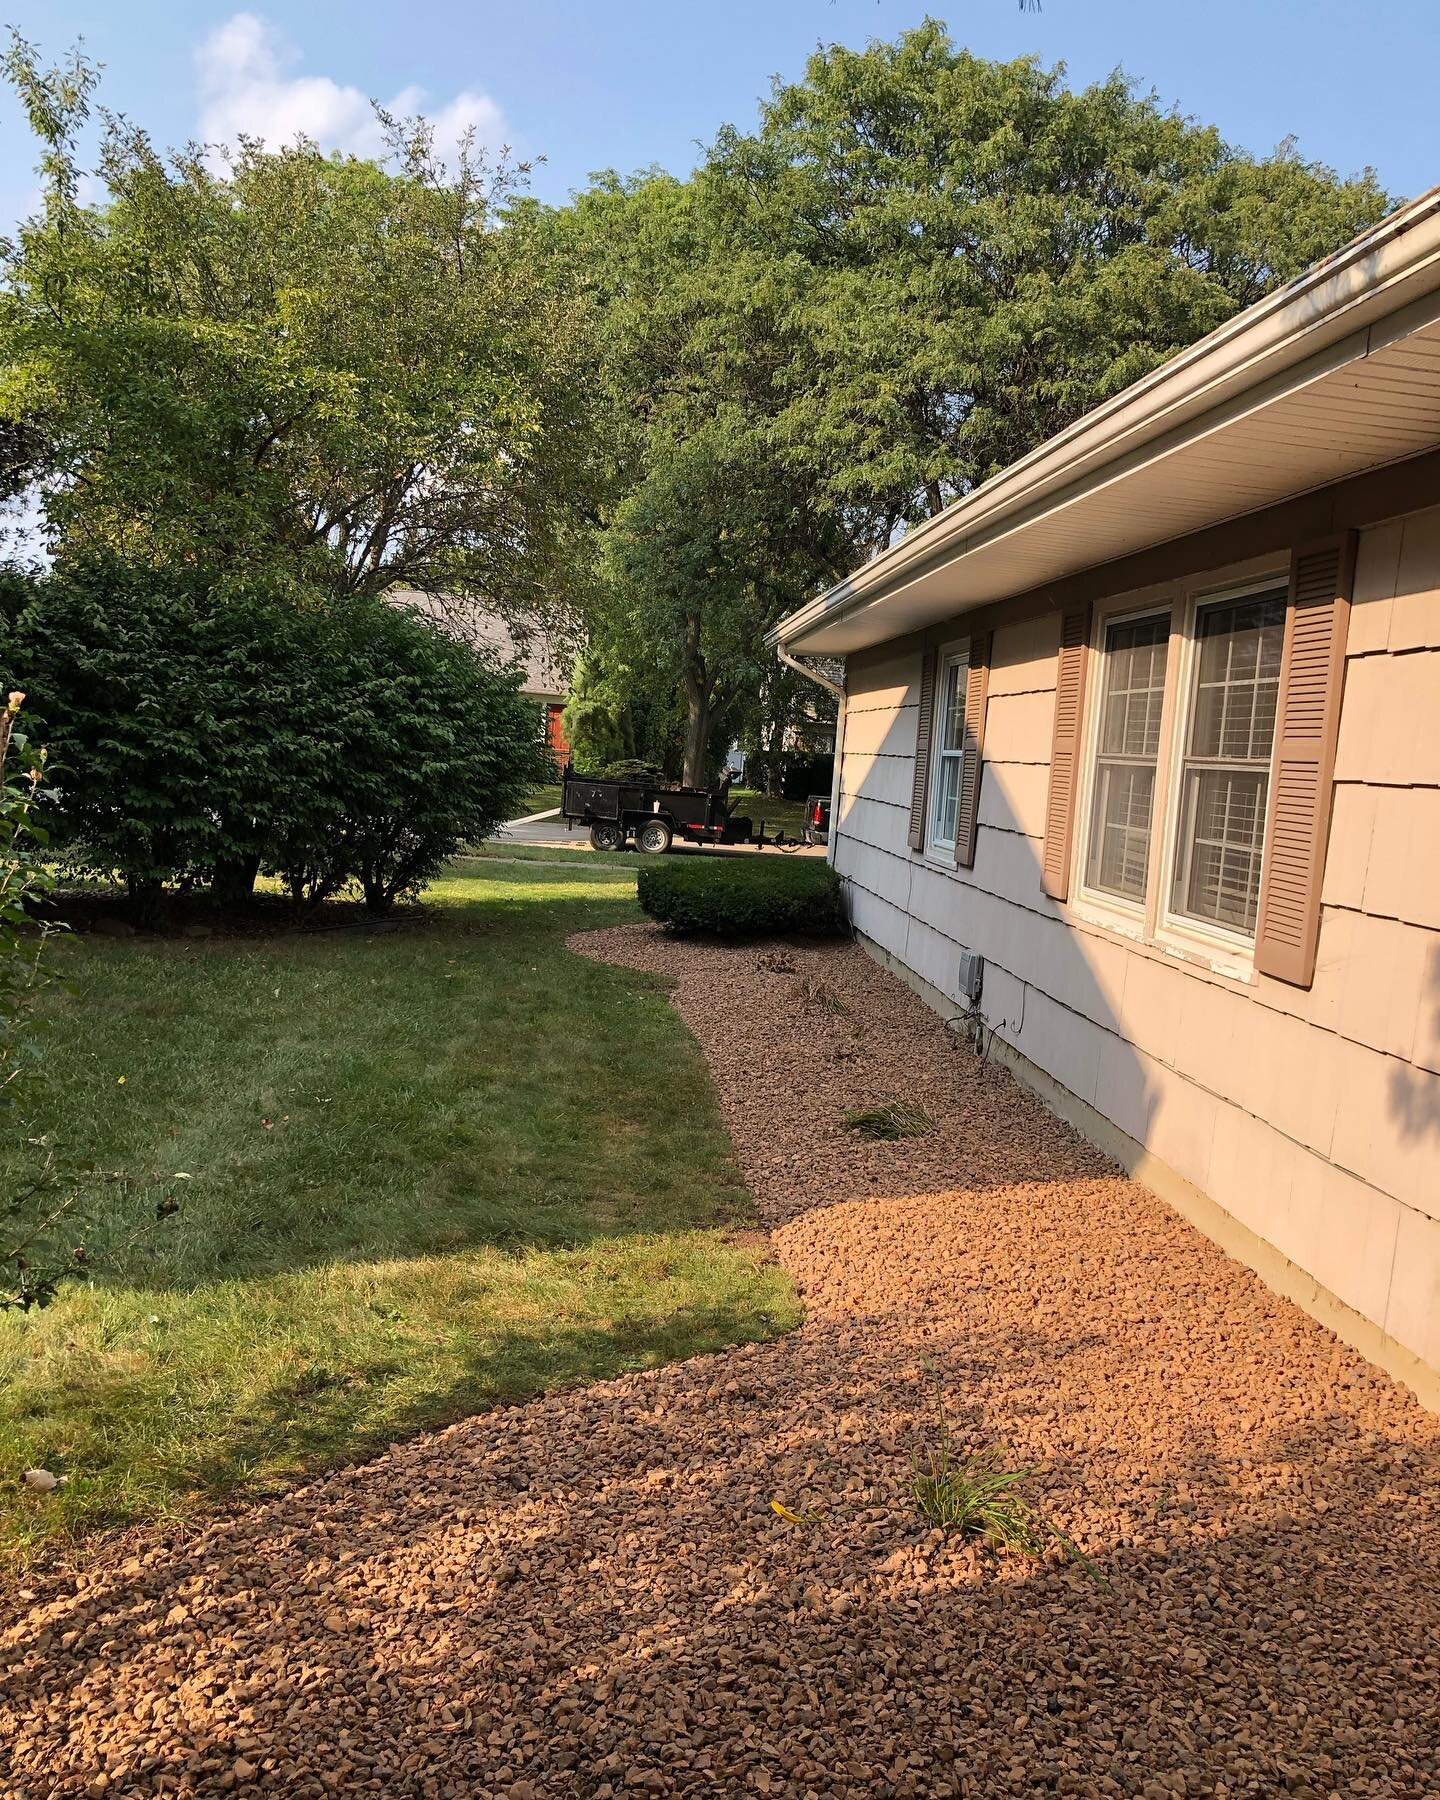 We completely cleaned out these garden beds , re edged , installed plastic weed barrier and installed decorative stone (beach wood pebbles) 
#landscape #landscapedesign #oaklandcountymichigan #gardenmaintenence #garden #gardening #gardendesign #garde